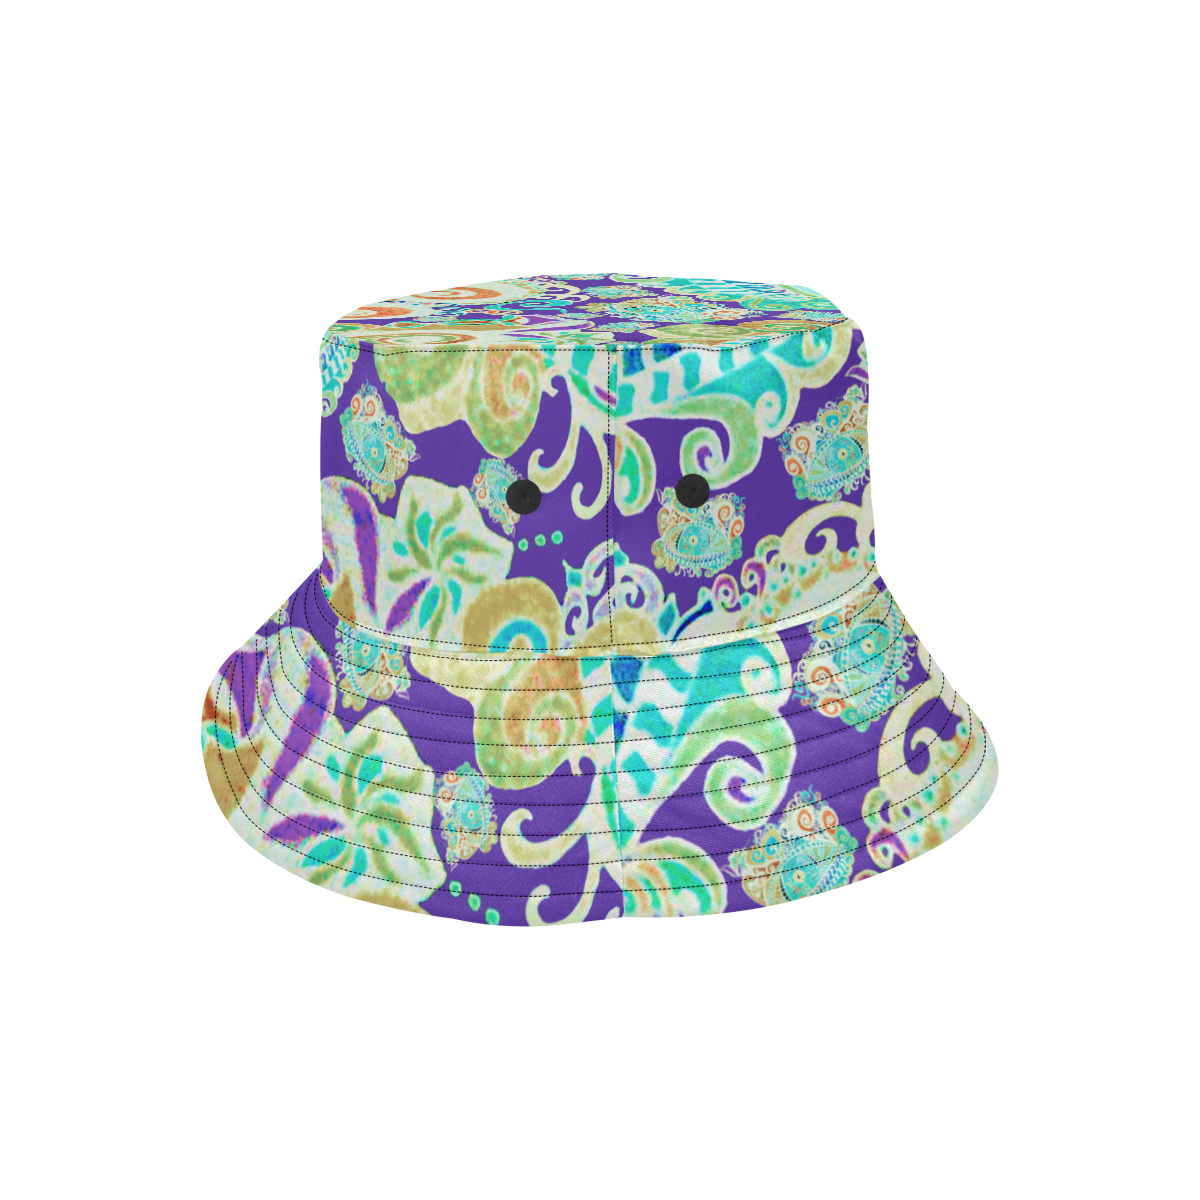 Your Paisley Blue Eyes by Aleta All Over Print Bucket Hat